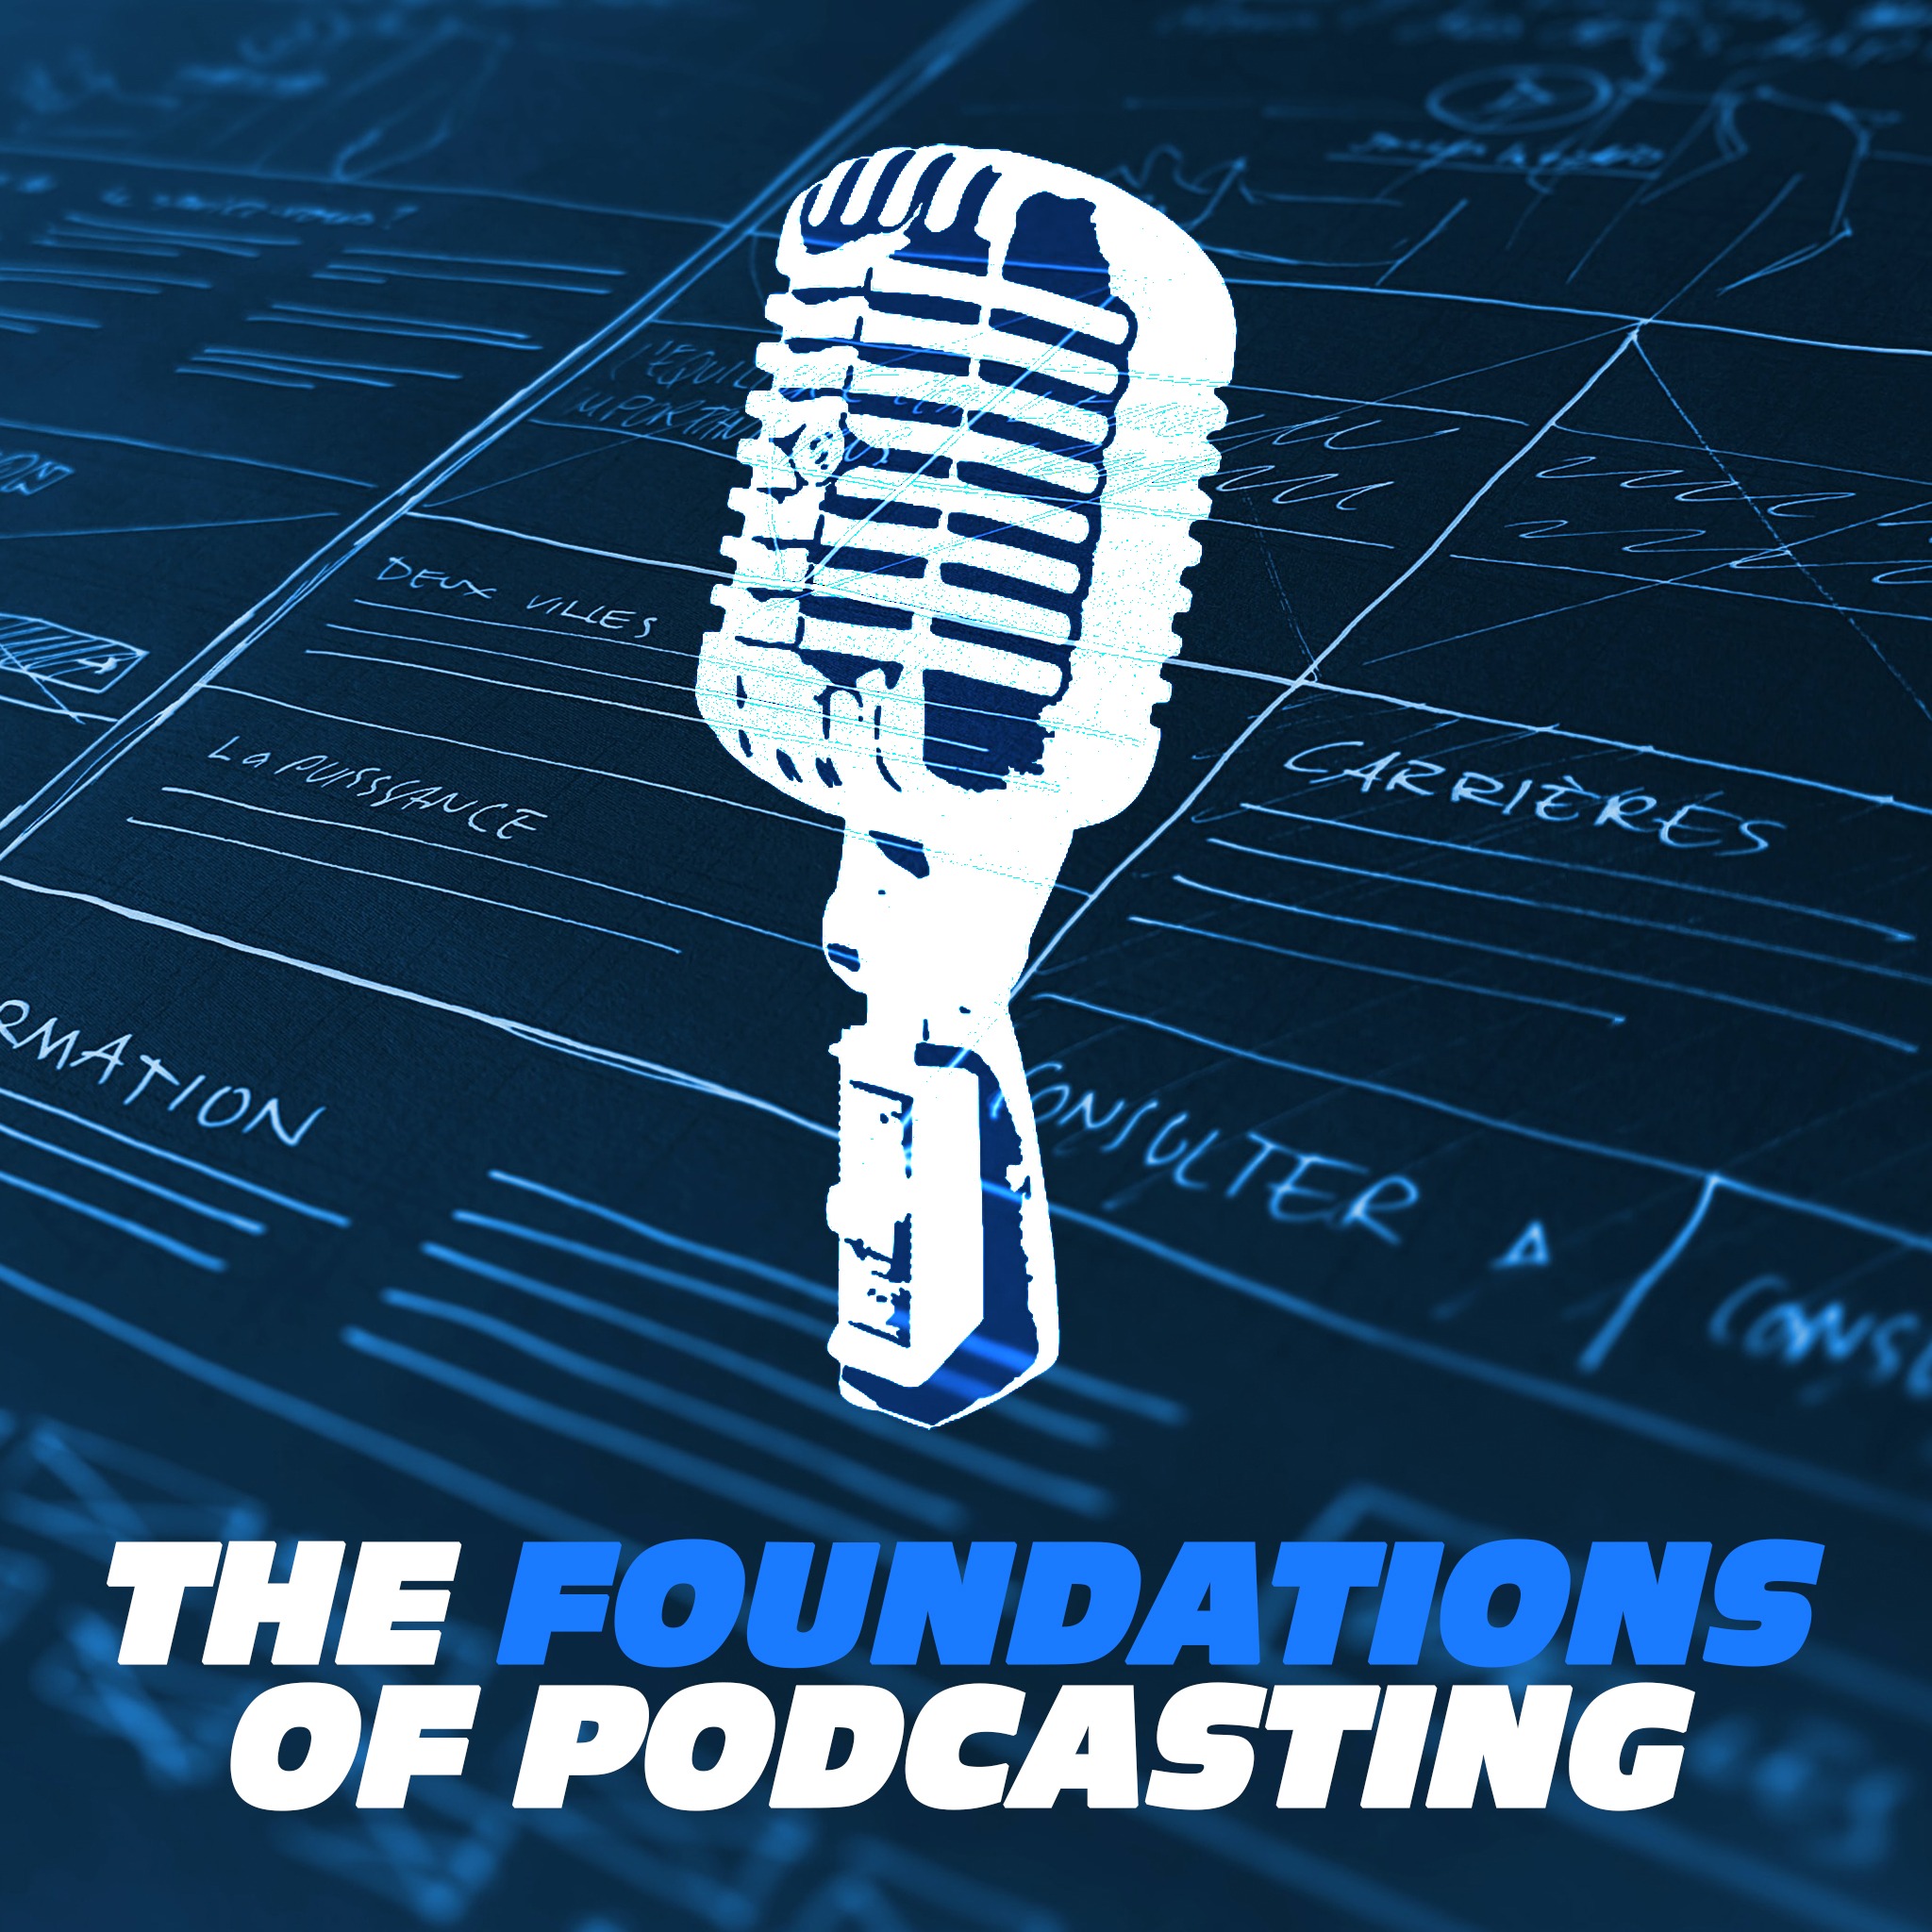 The Foundations of Podcasting